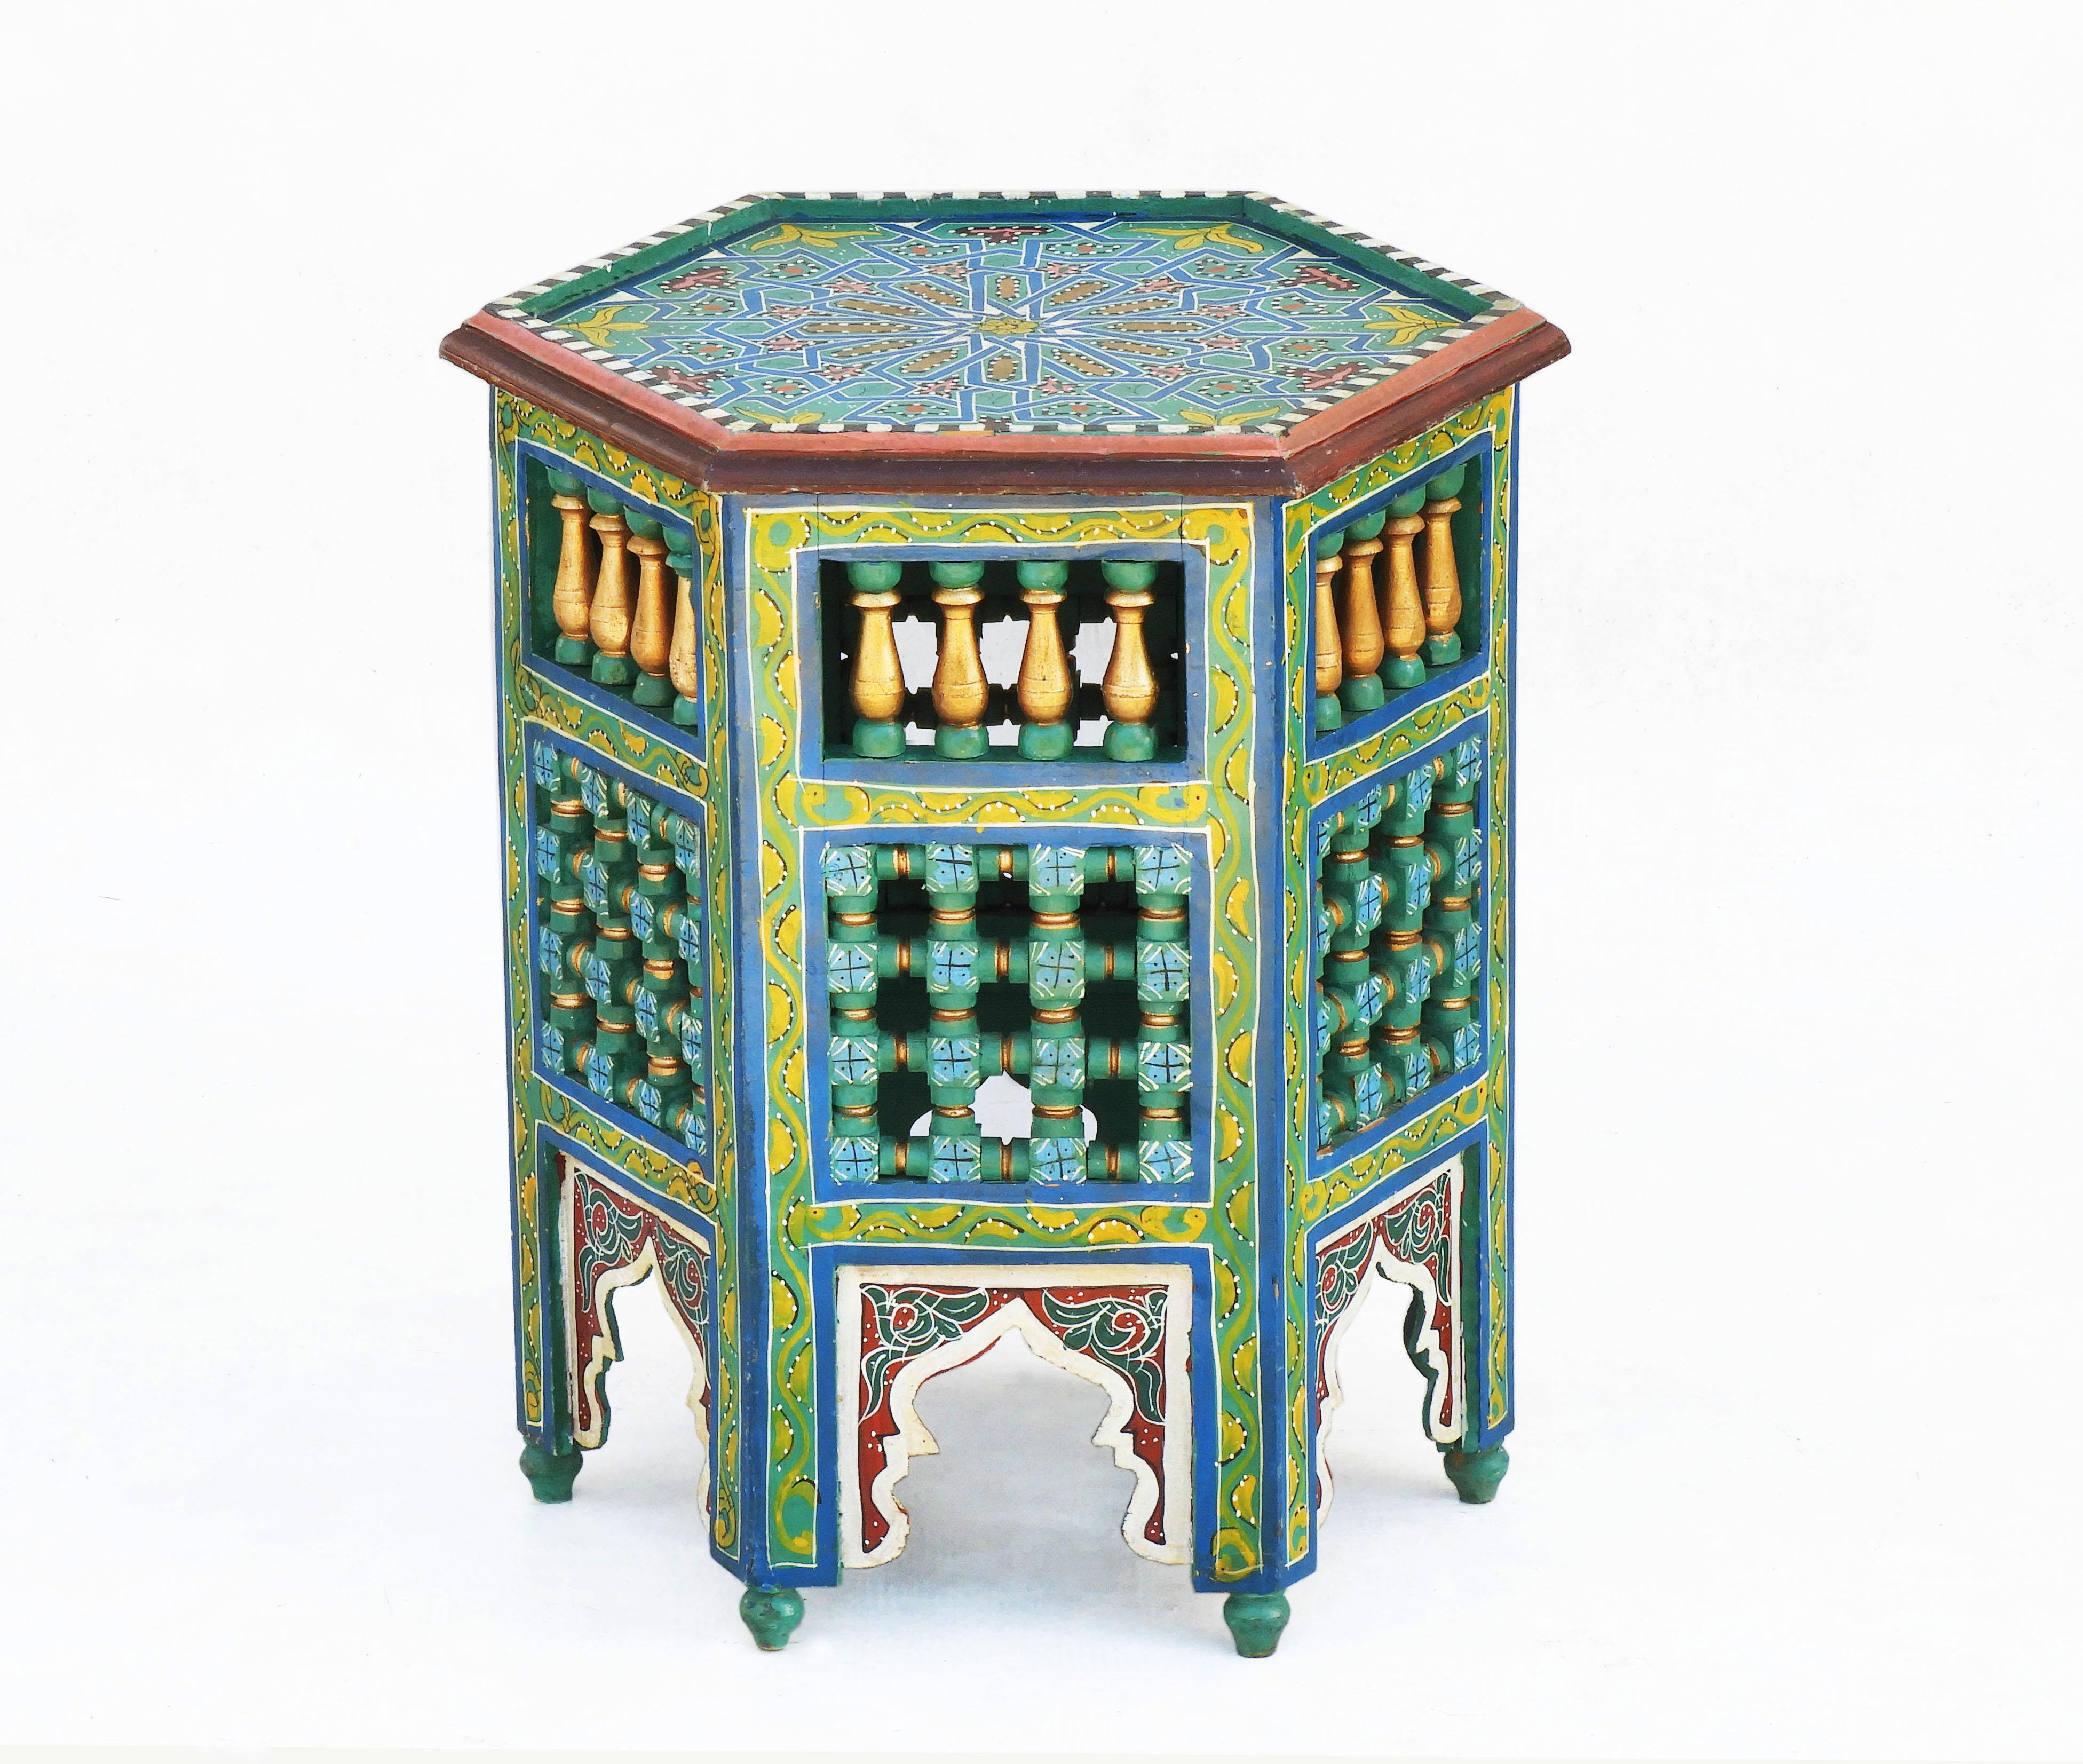 VintageMoroccan handcrafted and hand-painted side table or tabouret stool.
Attractive hexagonal form with Moorish arches.
Colourful Moroccan side table in a Hispano Moresque style with Moorish floral and geometrical designs.
A nice Bohemian accent